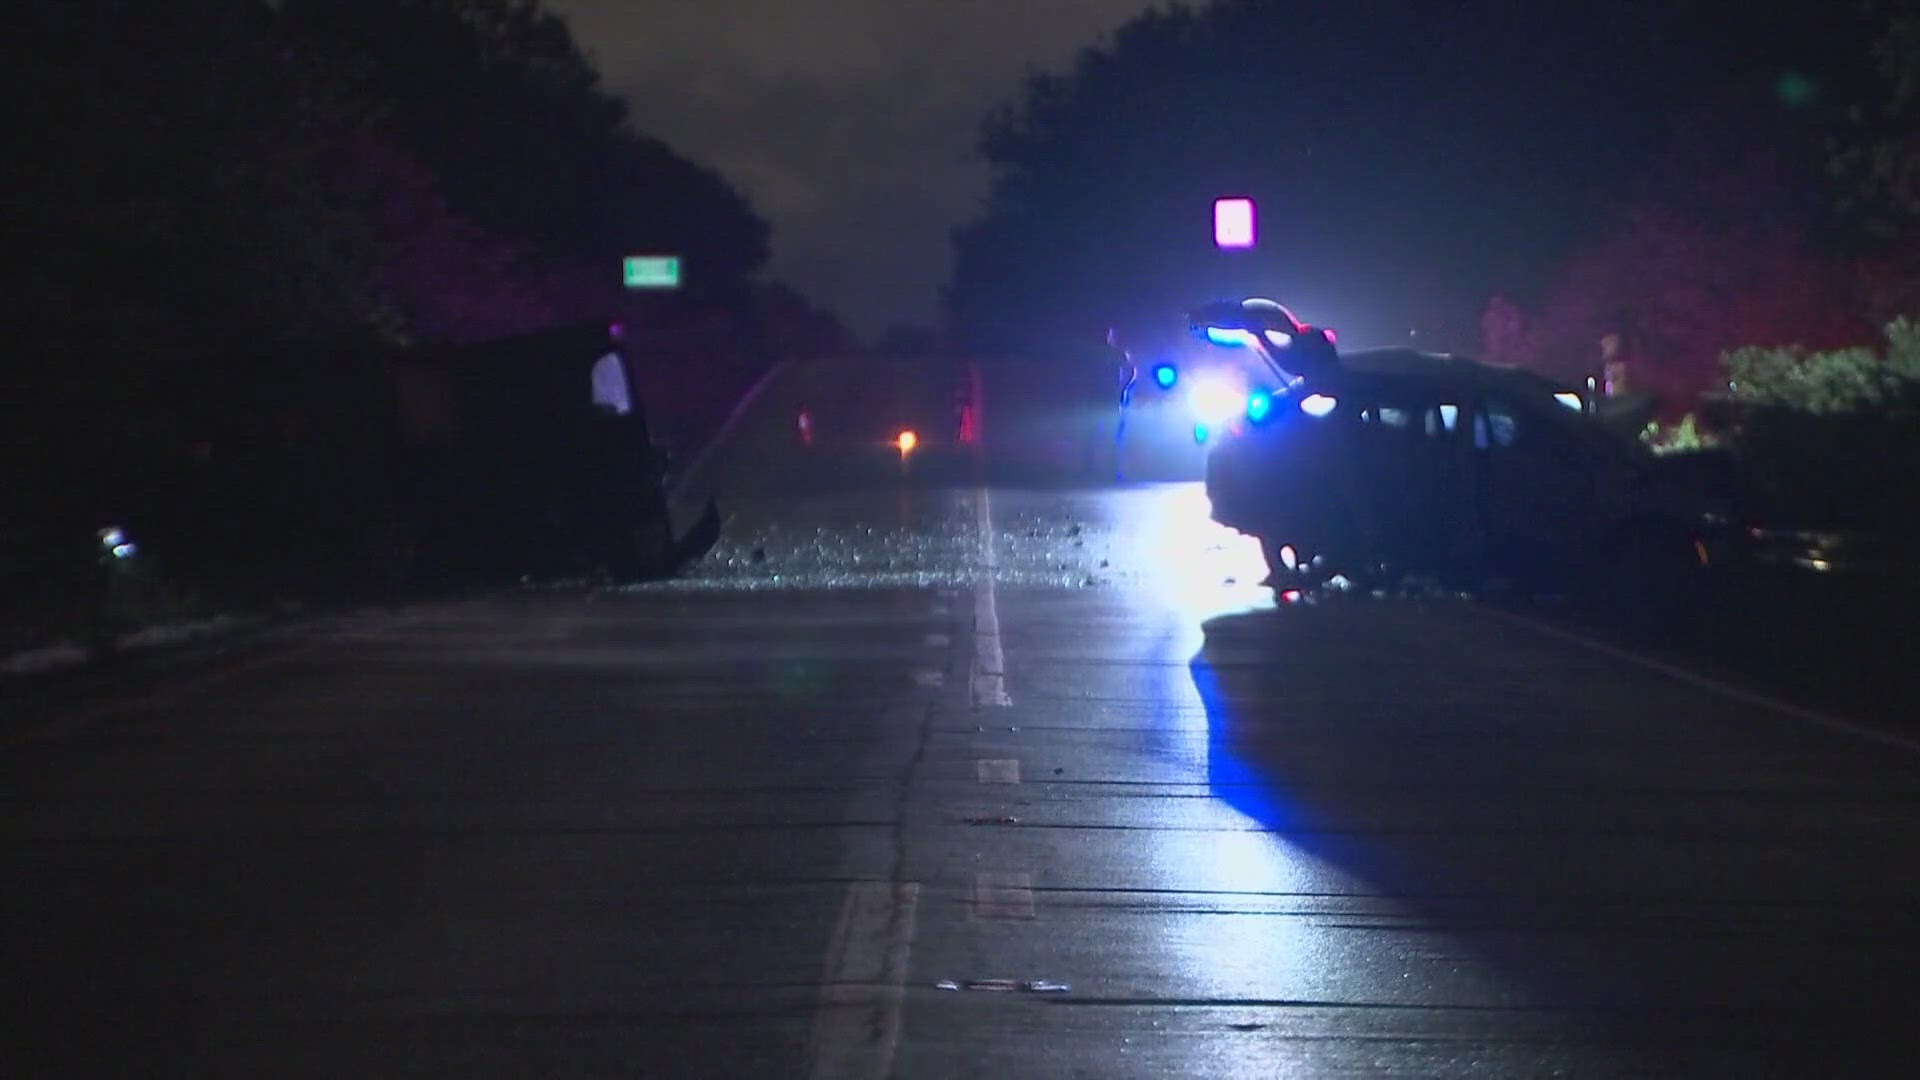 One woman was killed and two people were injured in a multi-vehicle crash in southeast Columbus Thursday evening, police said.